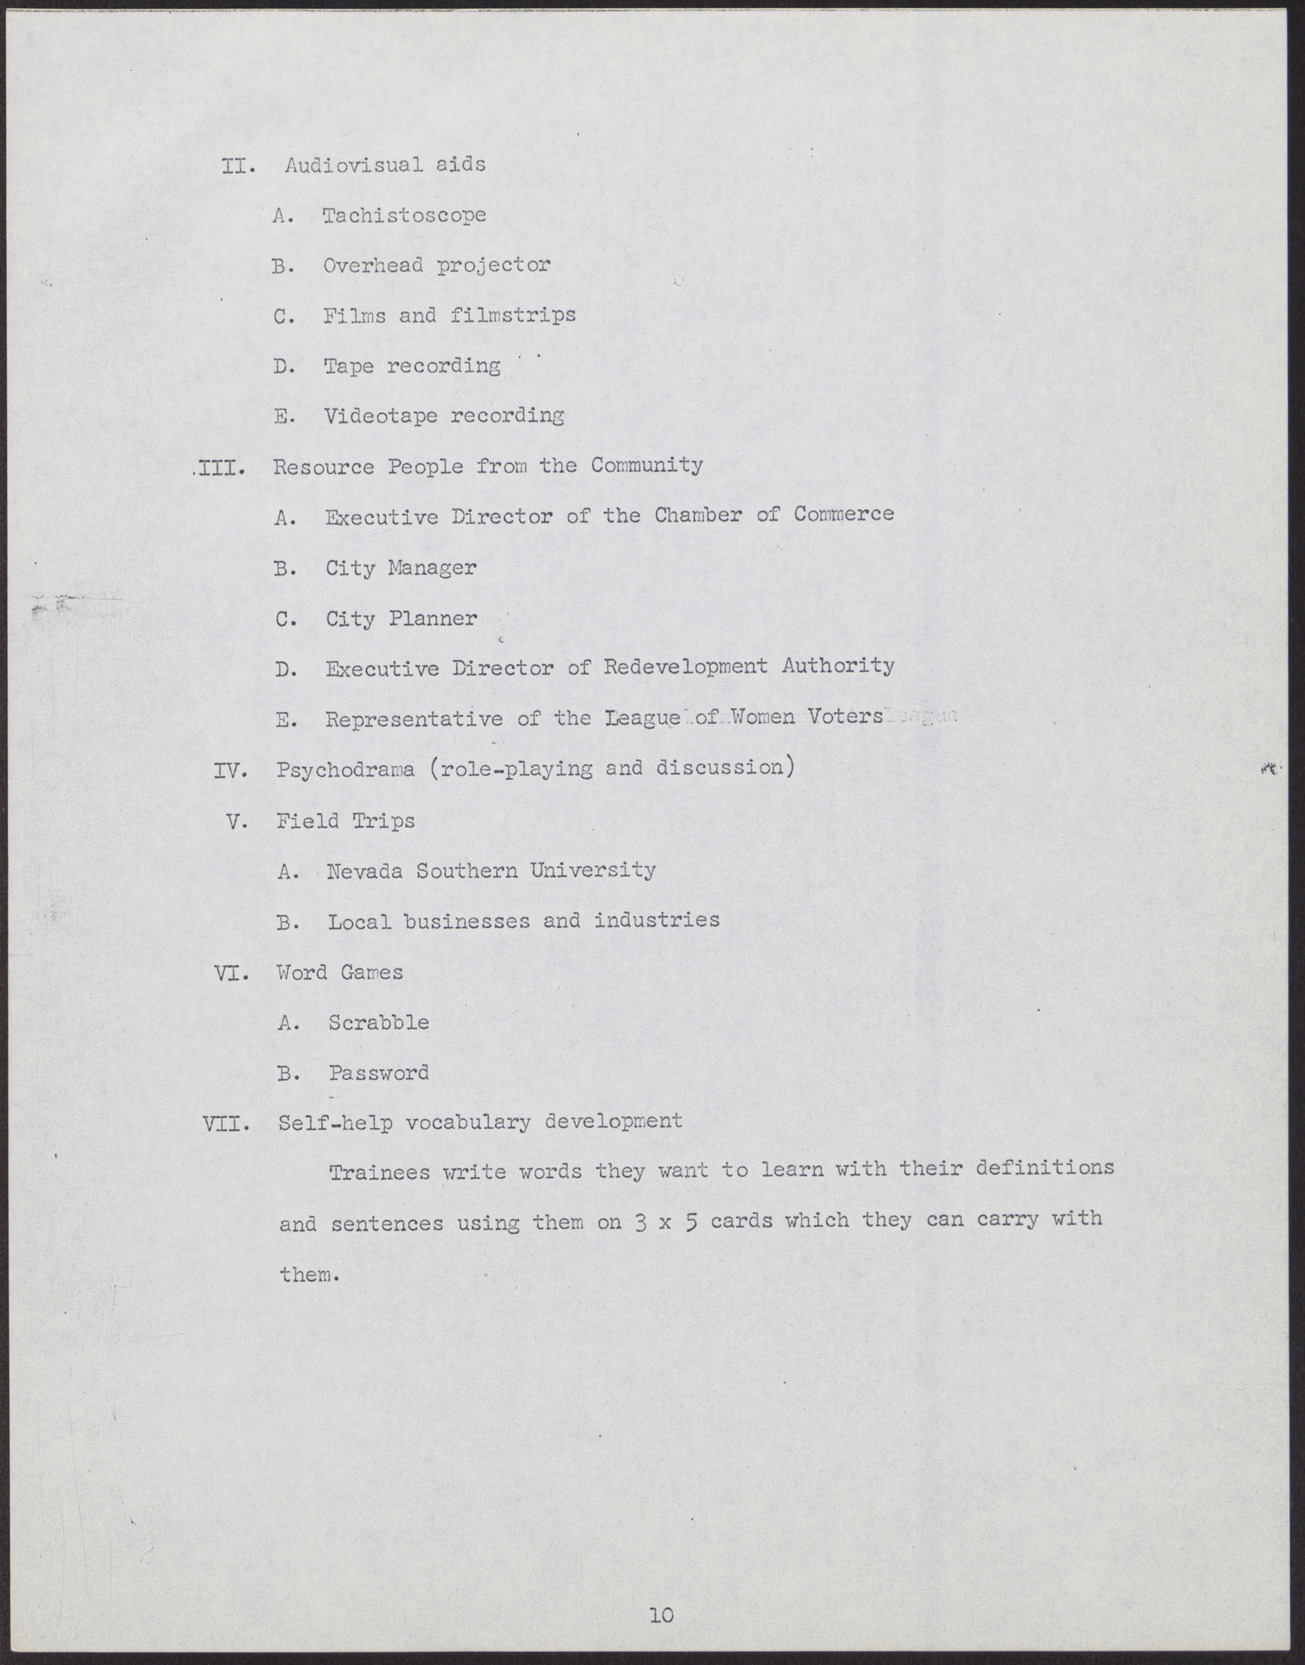 Proposal to the Clark County, Nevada Concentrated Employment Program (21 pages, missing some pages/sections listed in its table of contents), July 2, 1968, page 14